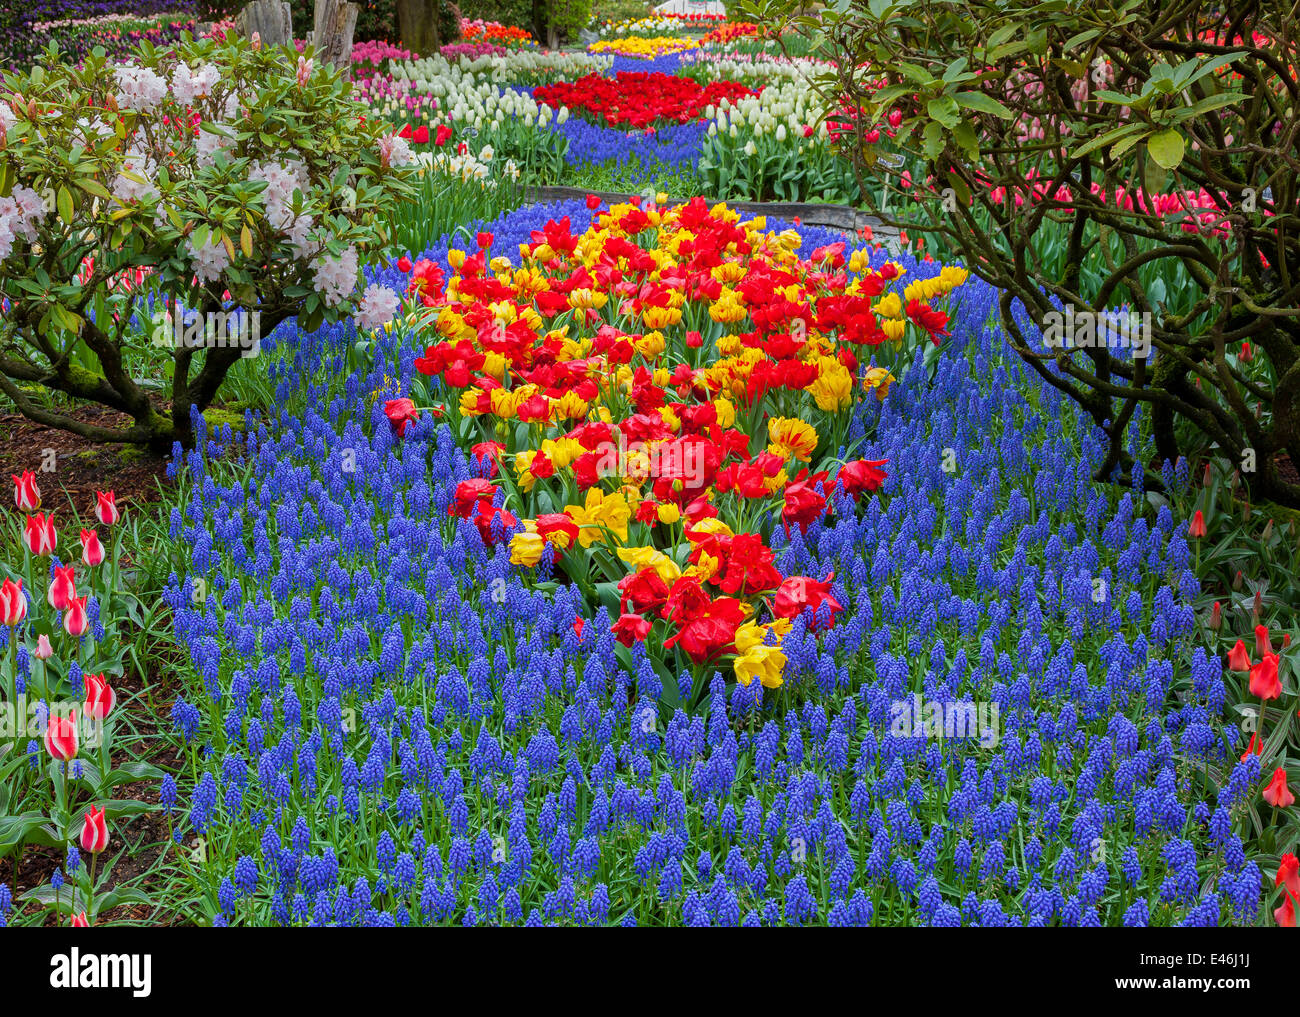 Skagit County, WA: Assorted varieties of flowering tulips and grape hyacinths form colorful patterns with rhododendrons Stock Photo